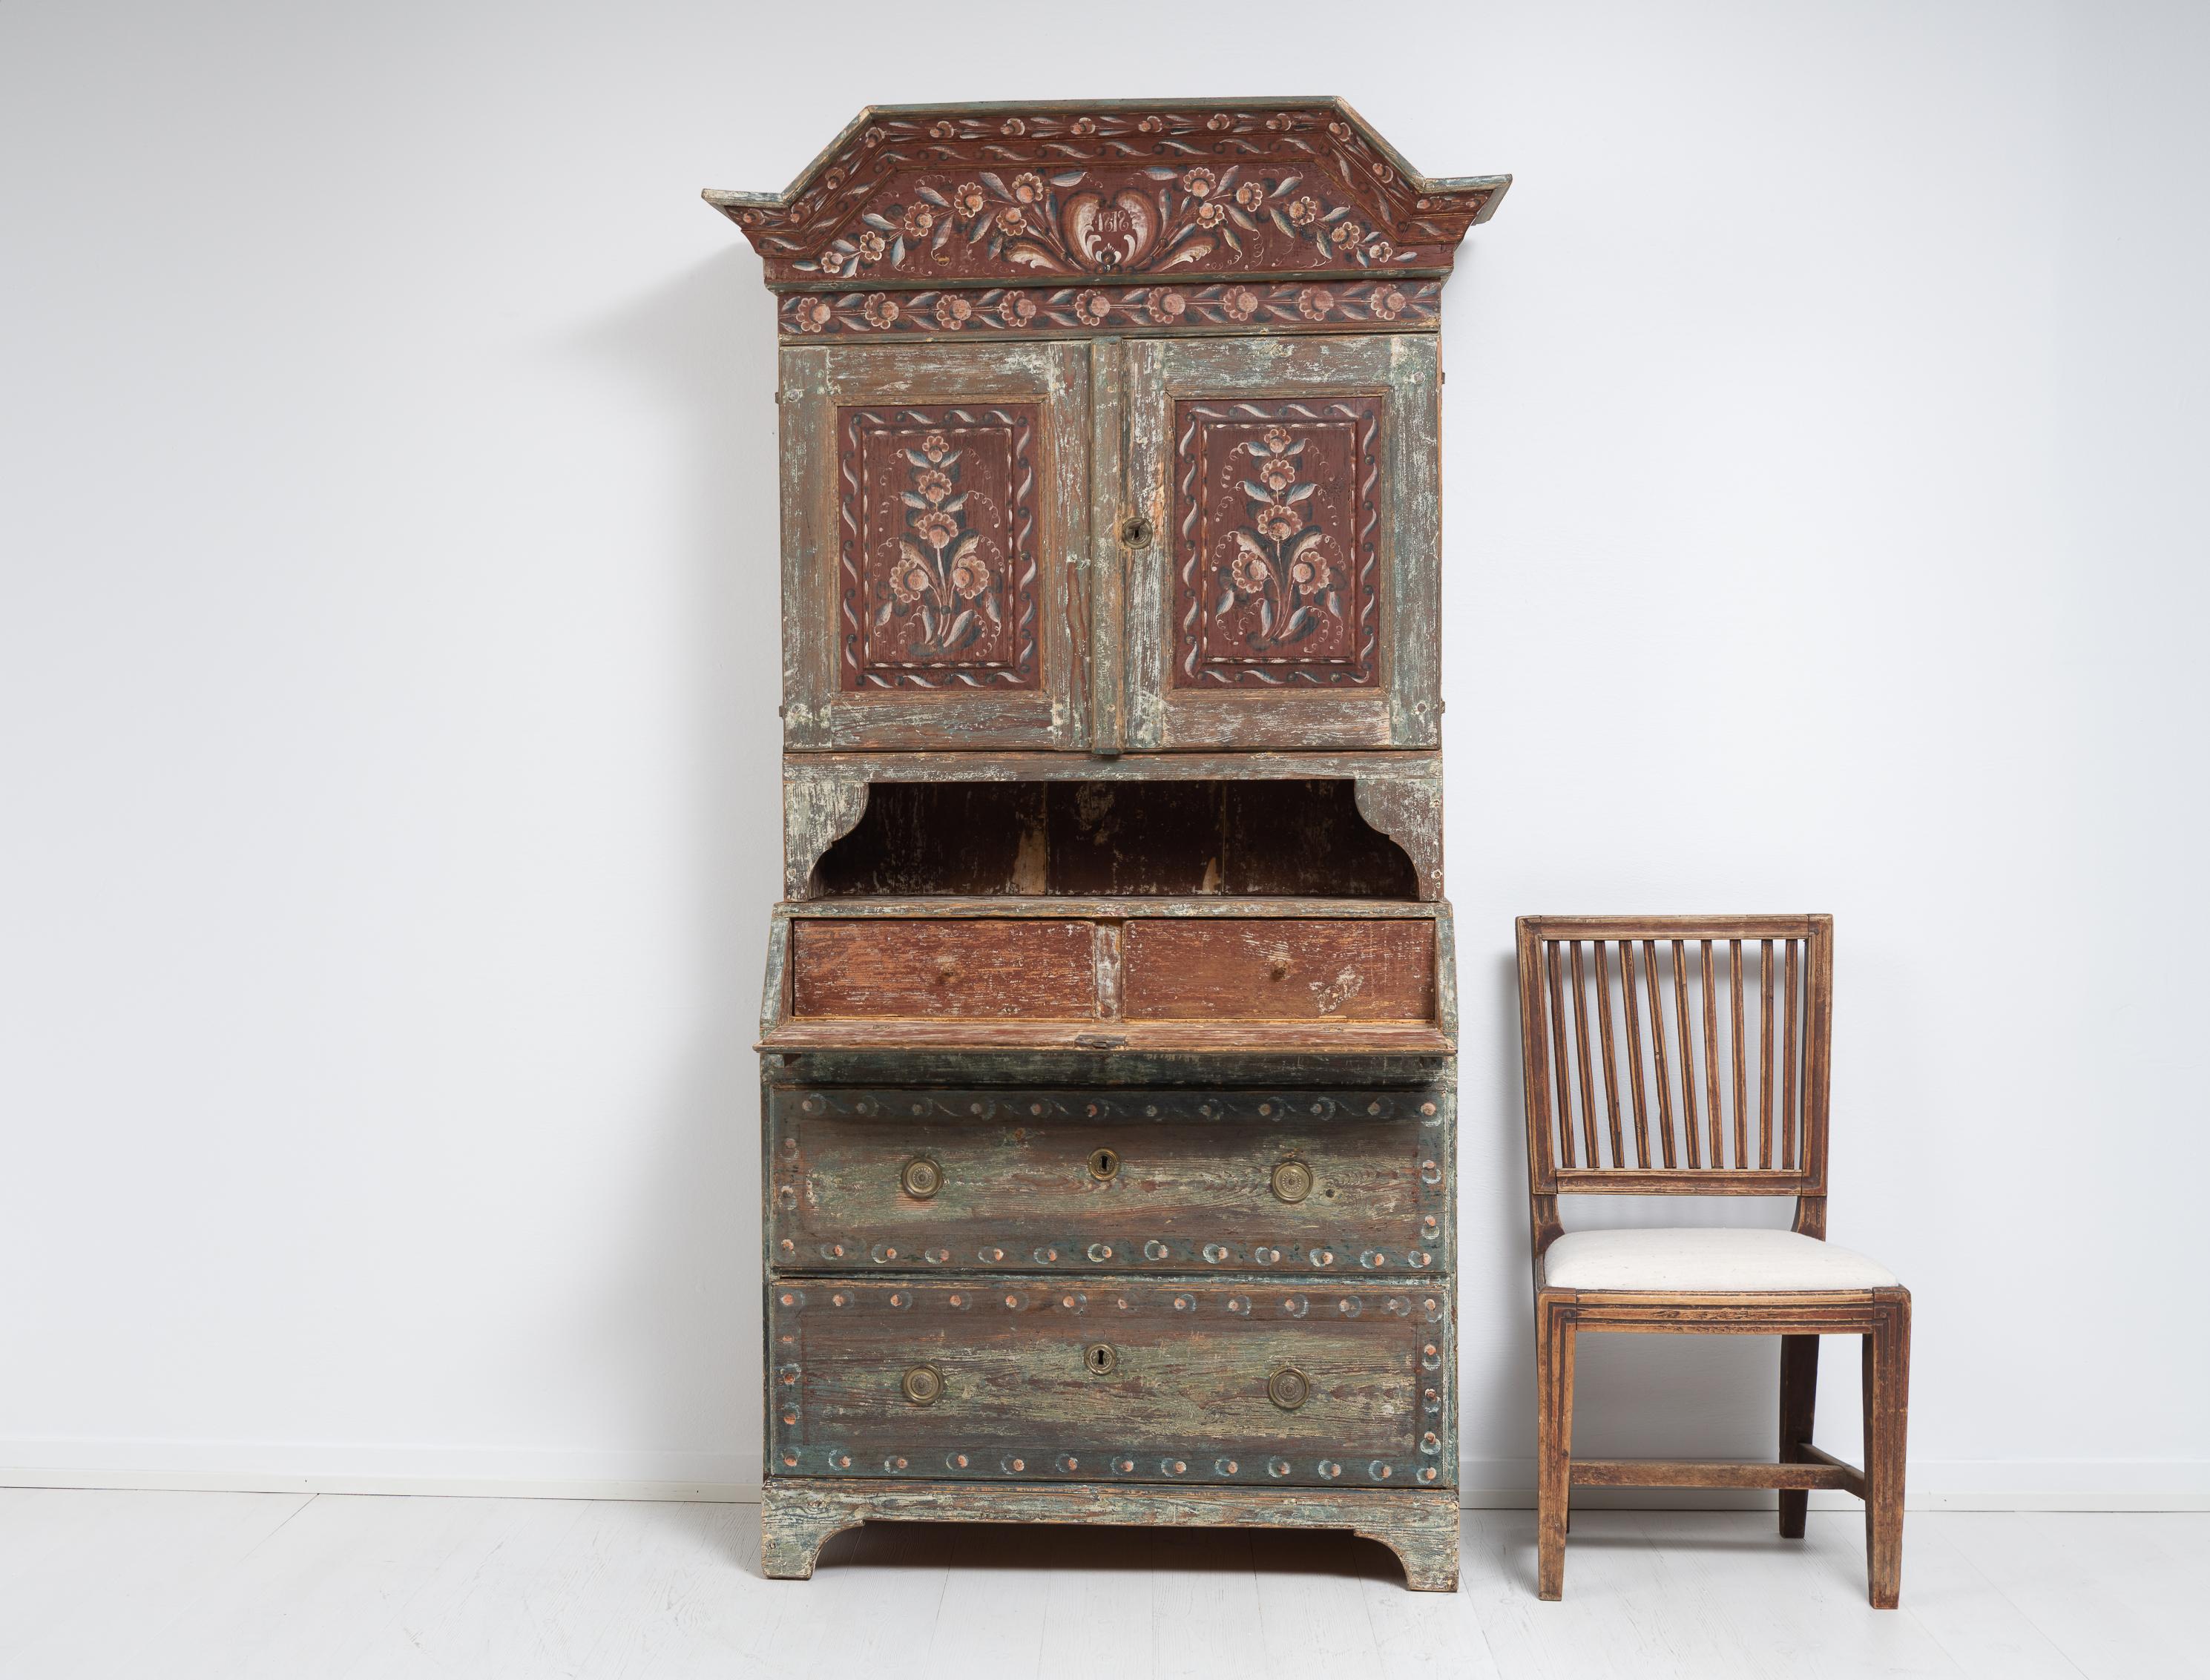 Swedish Folk Art secretary cabinet in two parts. The secretary cabinet has two large drawers, a writing desk and two upper doors with shelves inside. Original paint and dated 1818 on the pediment. The paint is distressed by time and use and has some